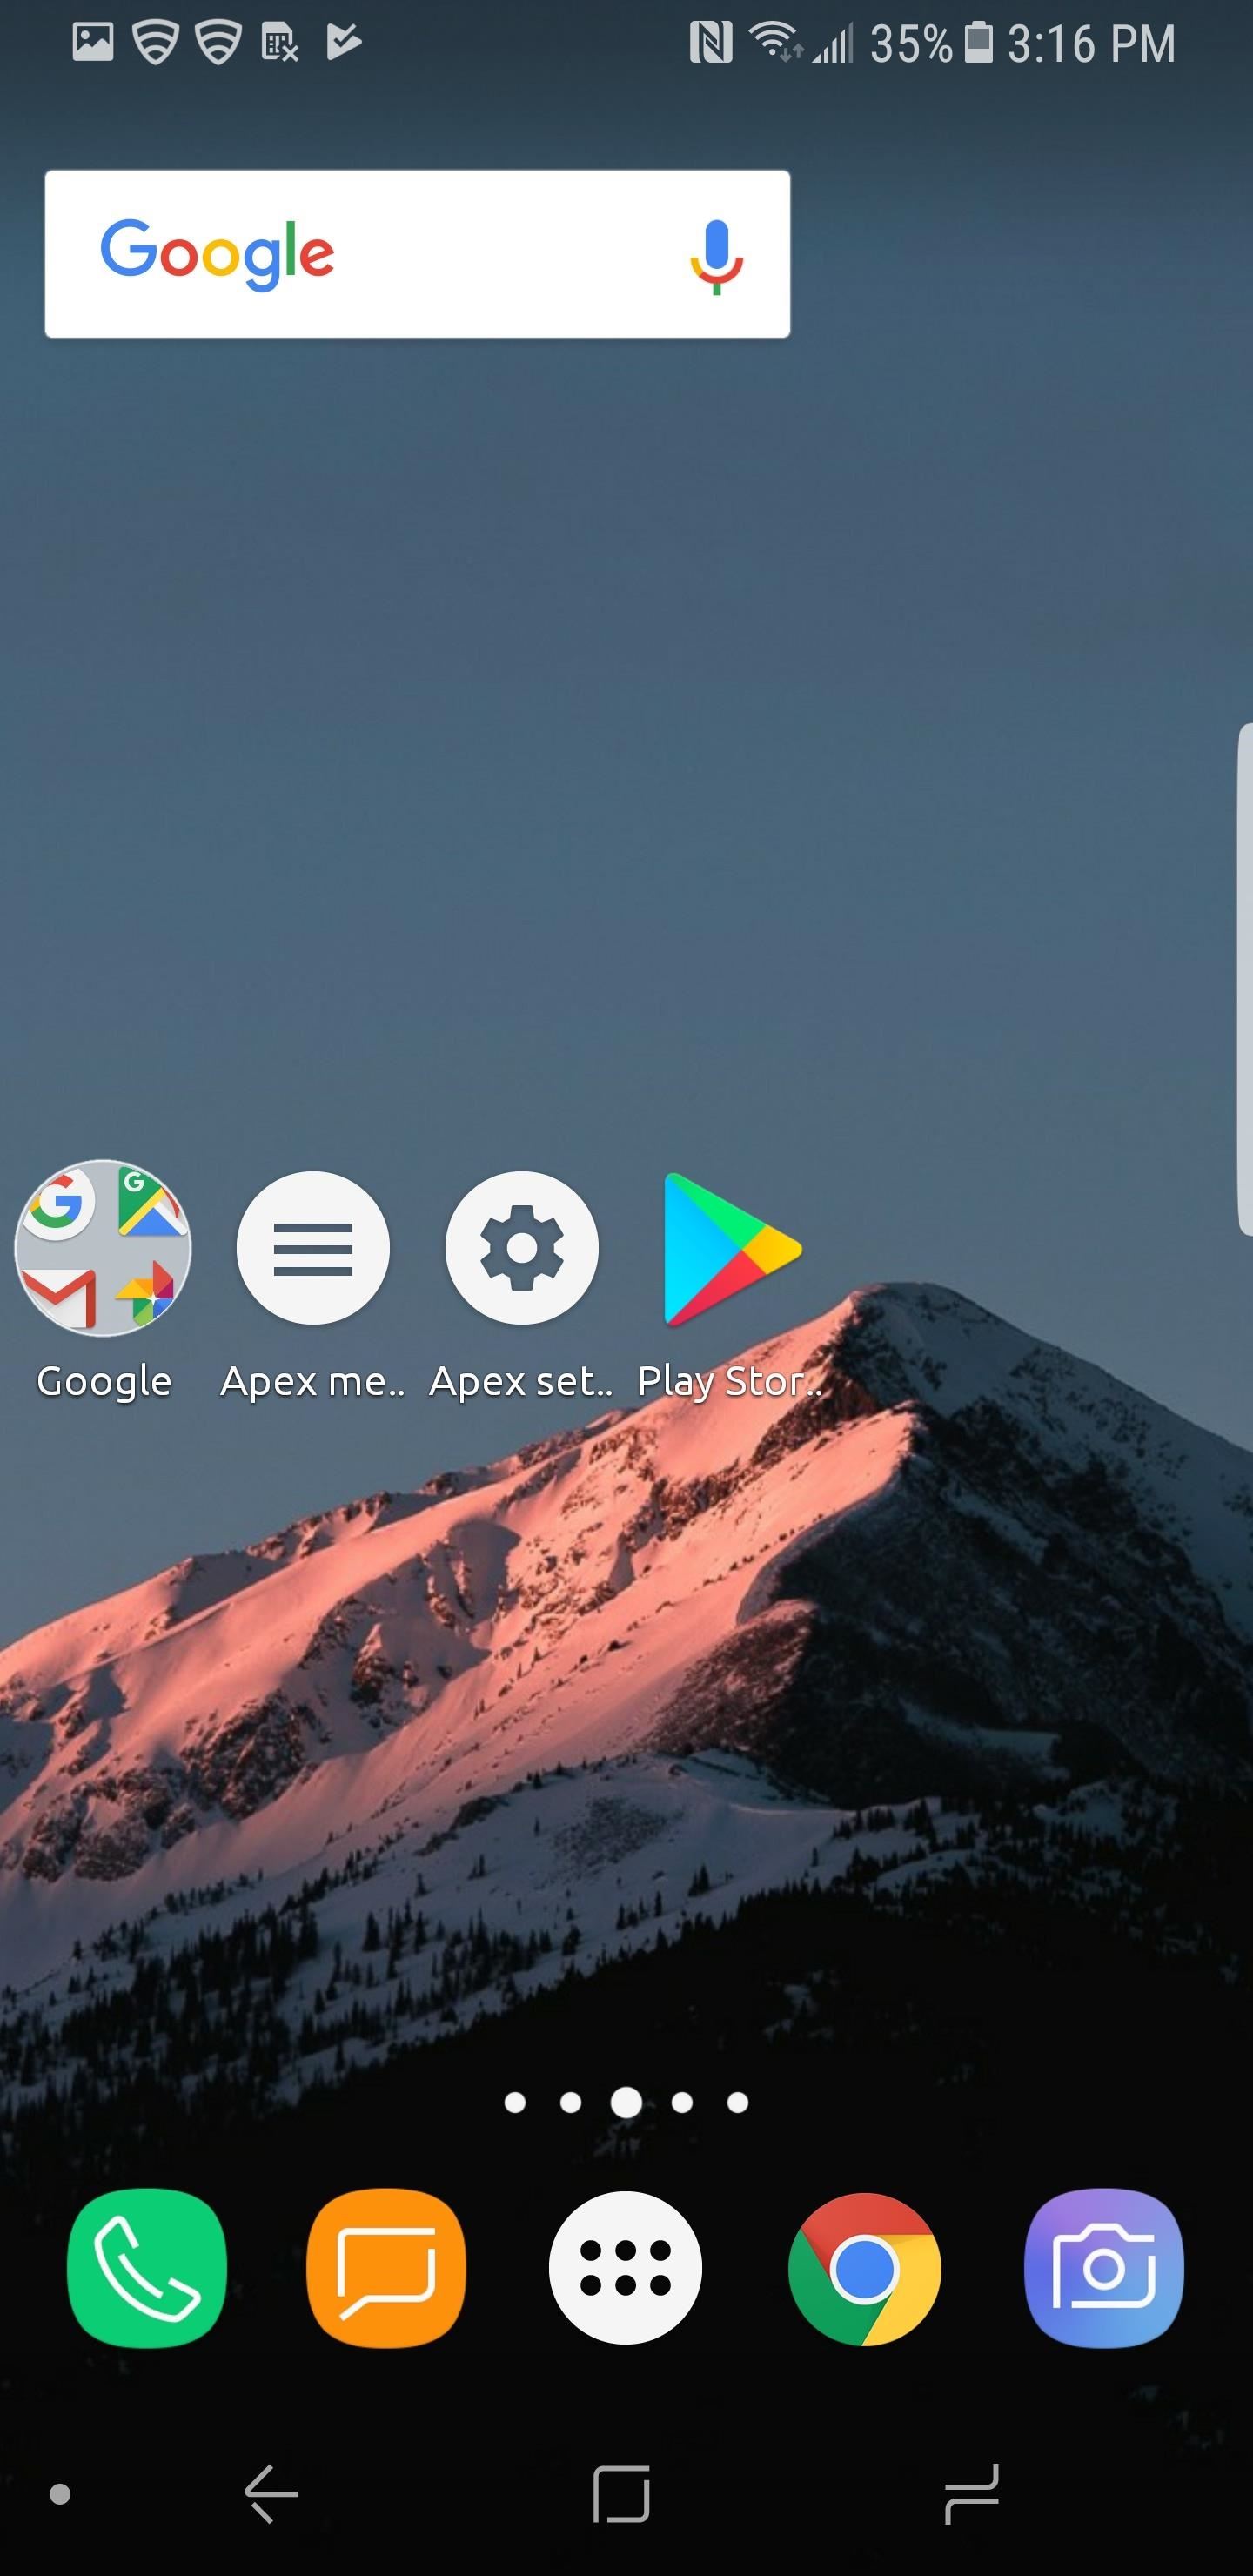 Ranked: The 5 Best Home Screen Launchers for Android